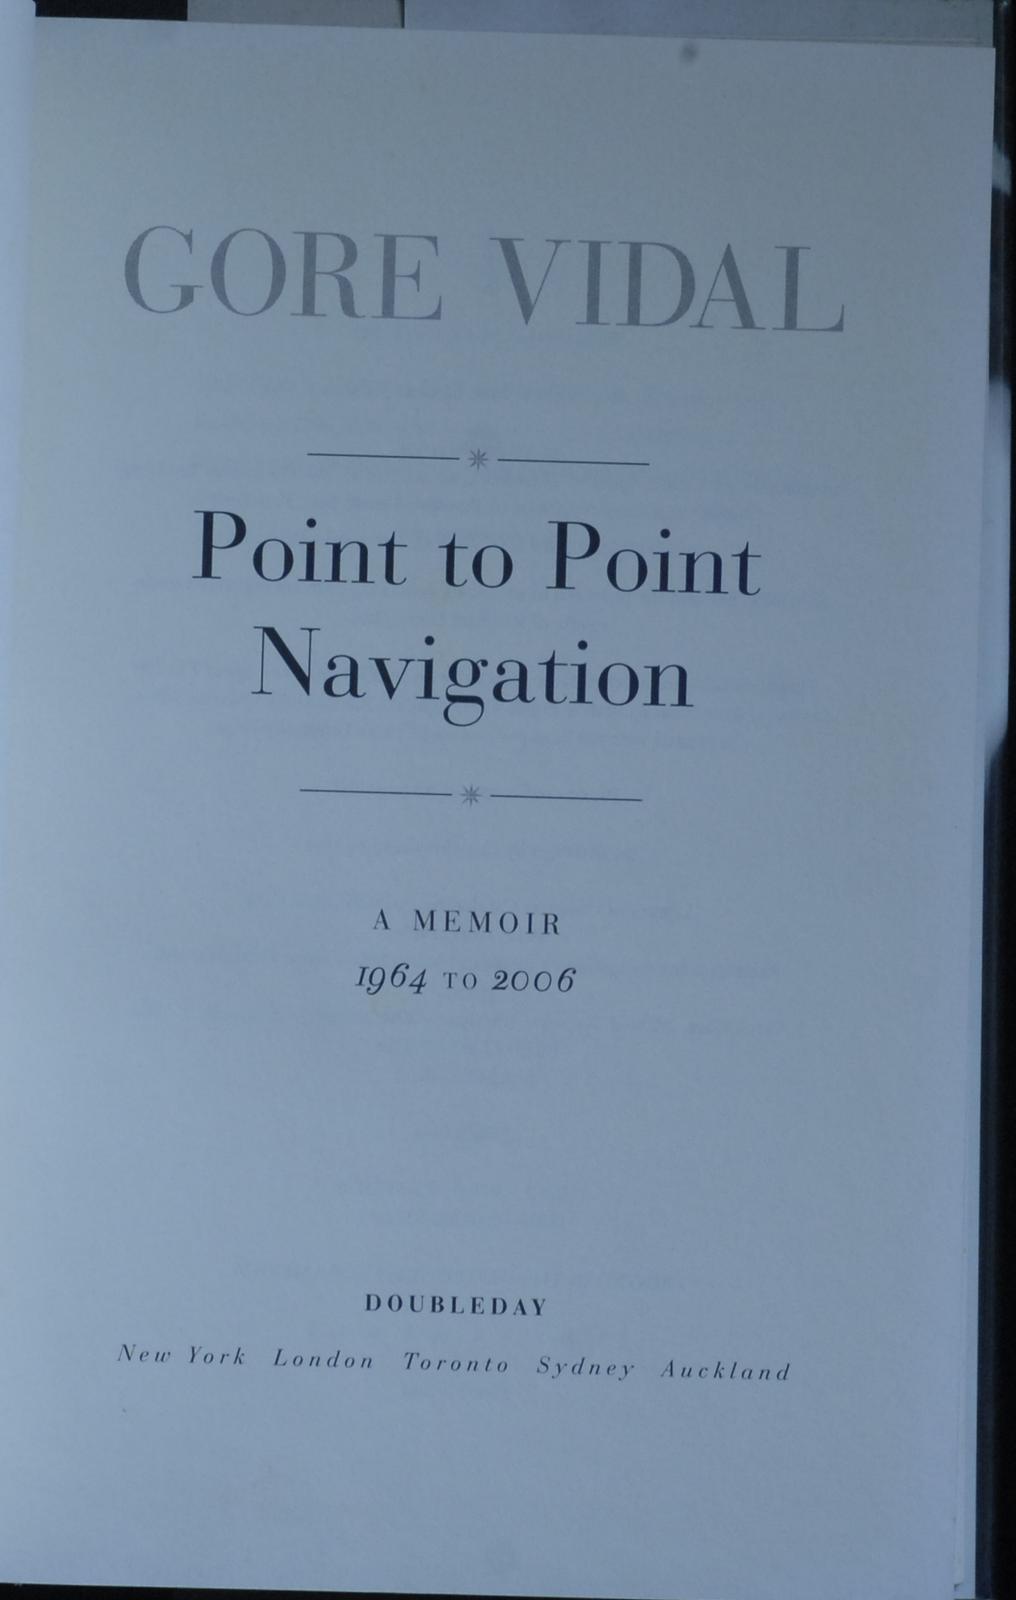 mbb006900c_-_Vidal_Gore_-_Point_To_Point_Navigation.A_Memoir_1964_To_2006_-_Contains_Illustrations.jpg